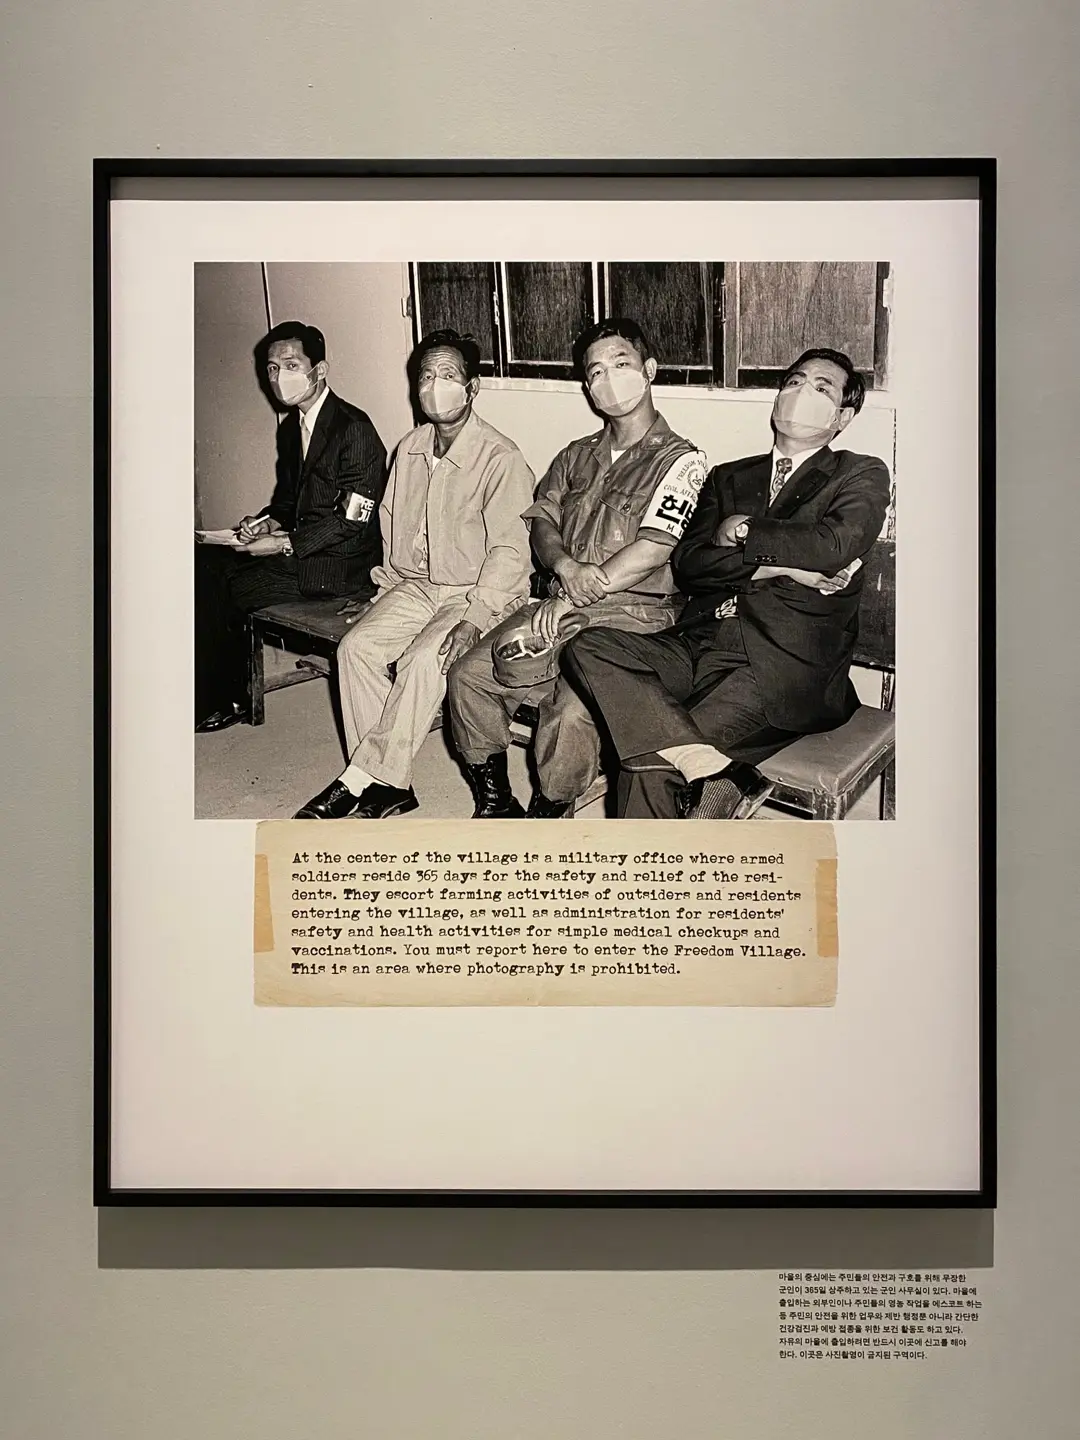 A framed digital print measuring 120x140cm is mounted on a wall, depicting four individuals with an accompanying caption about Freedom Village and Influenza.